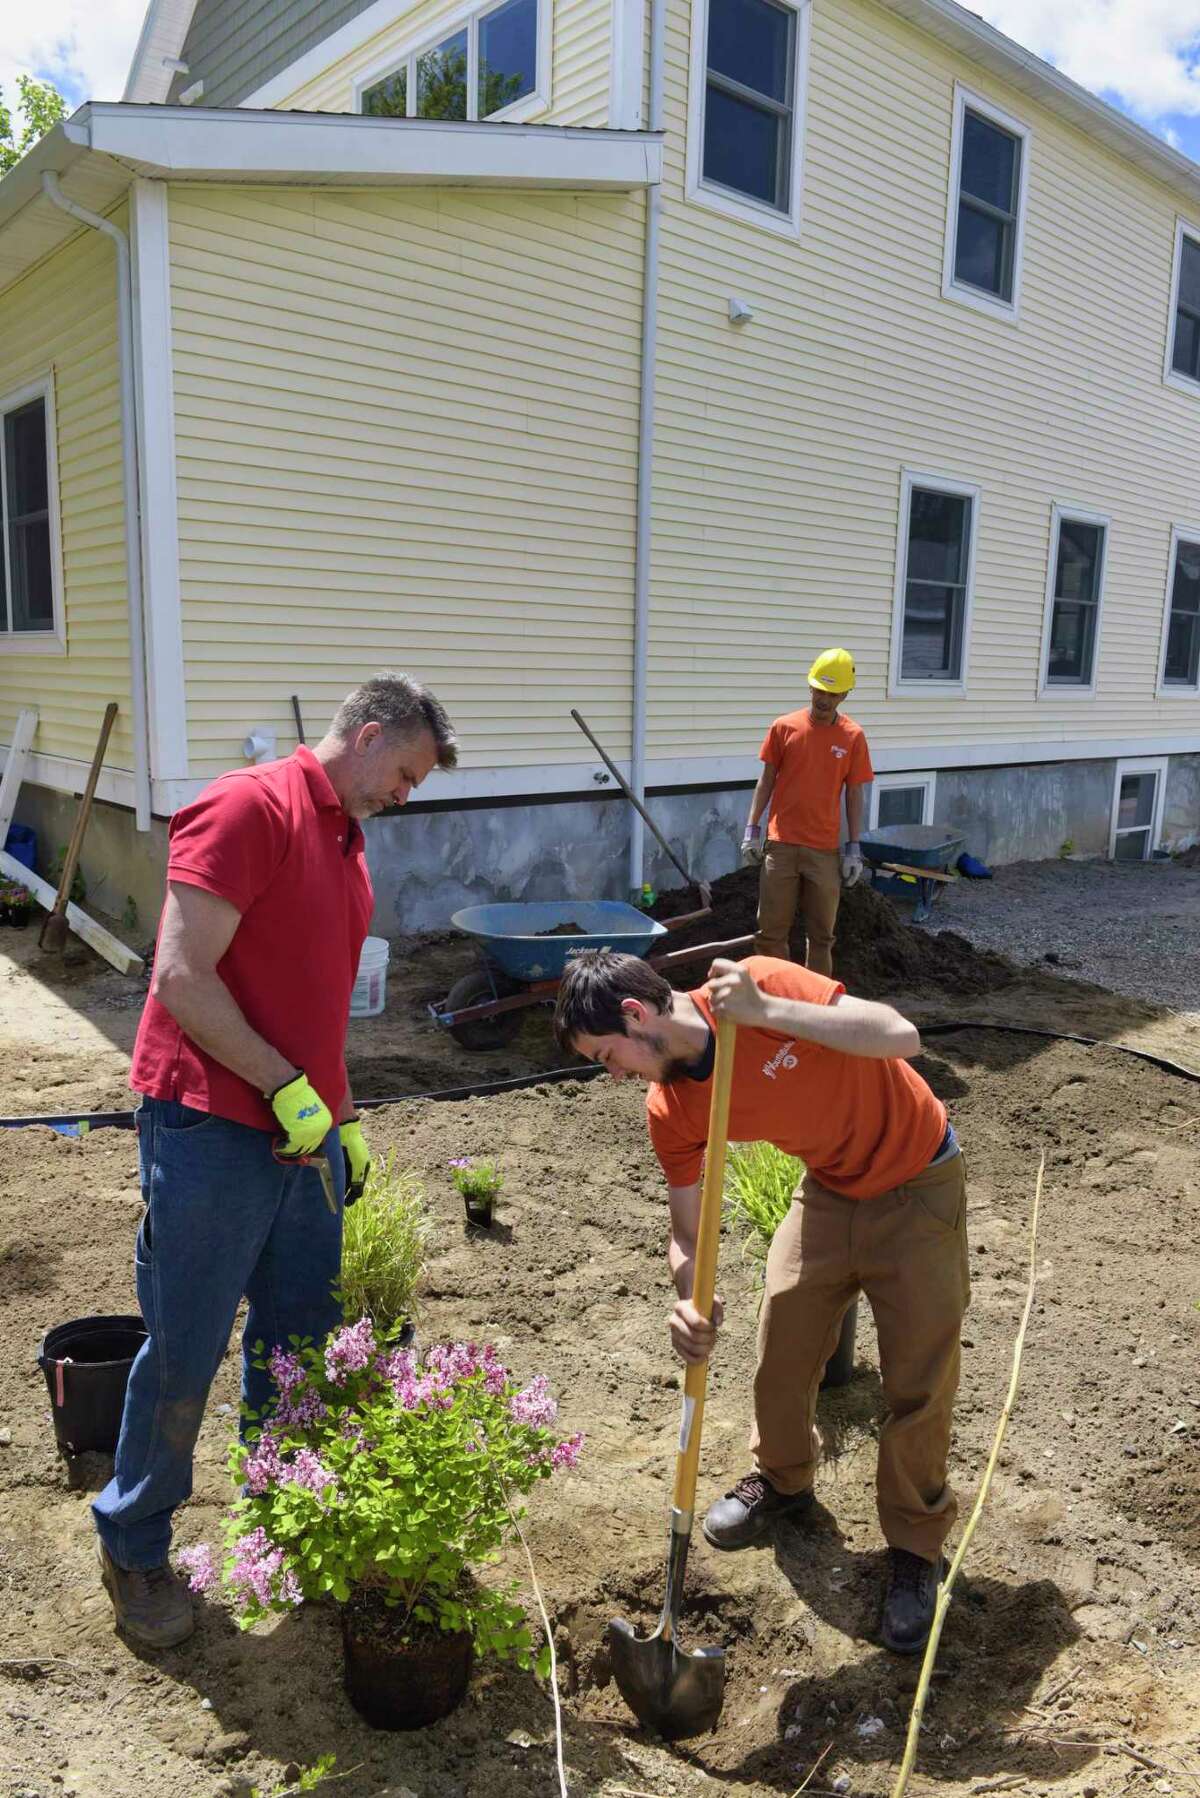 George Brower, left, construction manager for SEAT works with Youth Build's Lucas Marriner, foreground, and Anthony Bellamy, as they construct a rain garden at the Youth Build Affordable Homes project on Tuesday, May 21, 2019, in Schenectady, N.Y. (Paul Buckowski/Times Union)